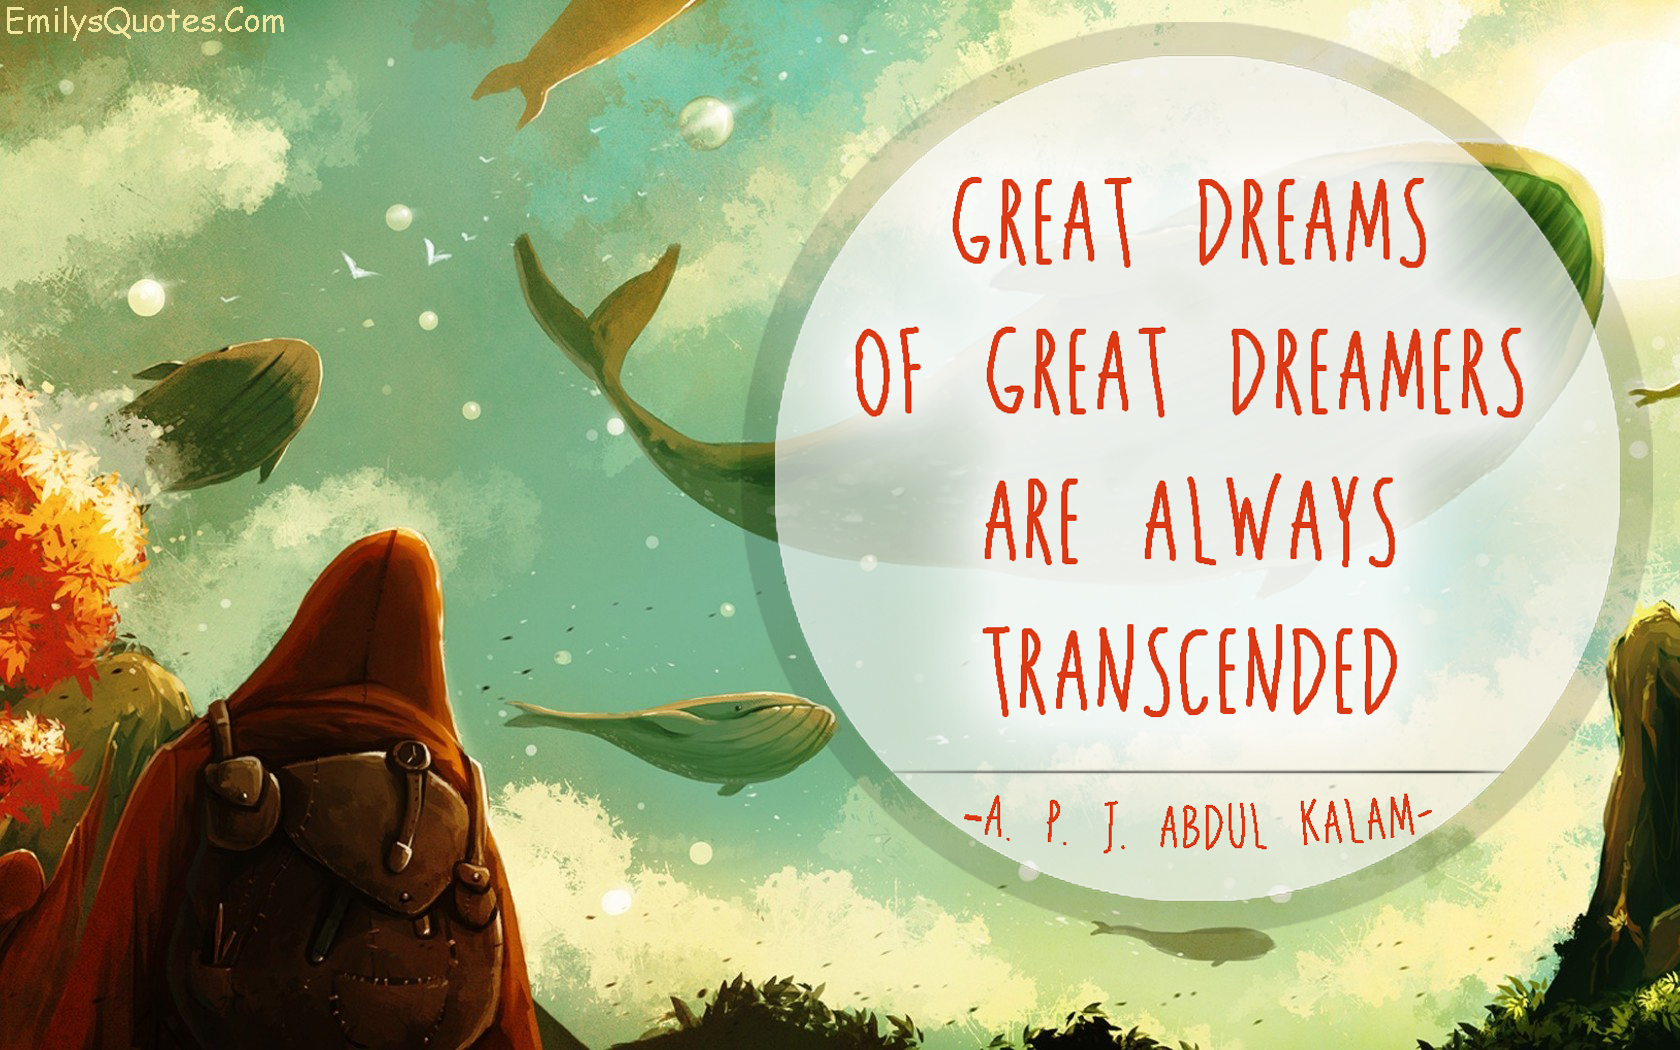 Great dreams of great dreamers are always transcended